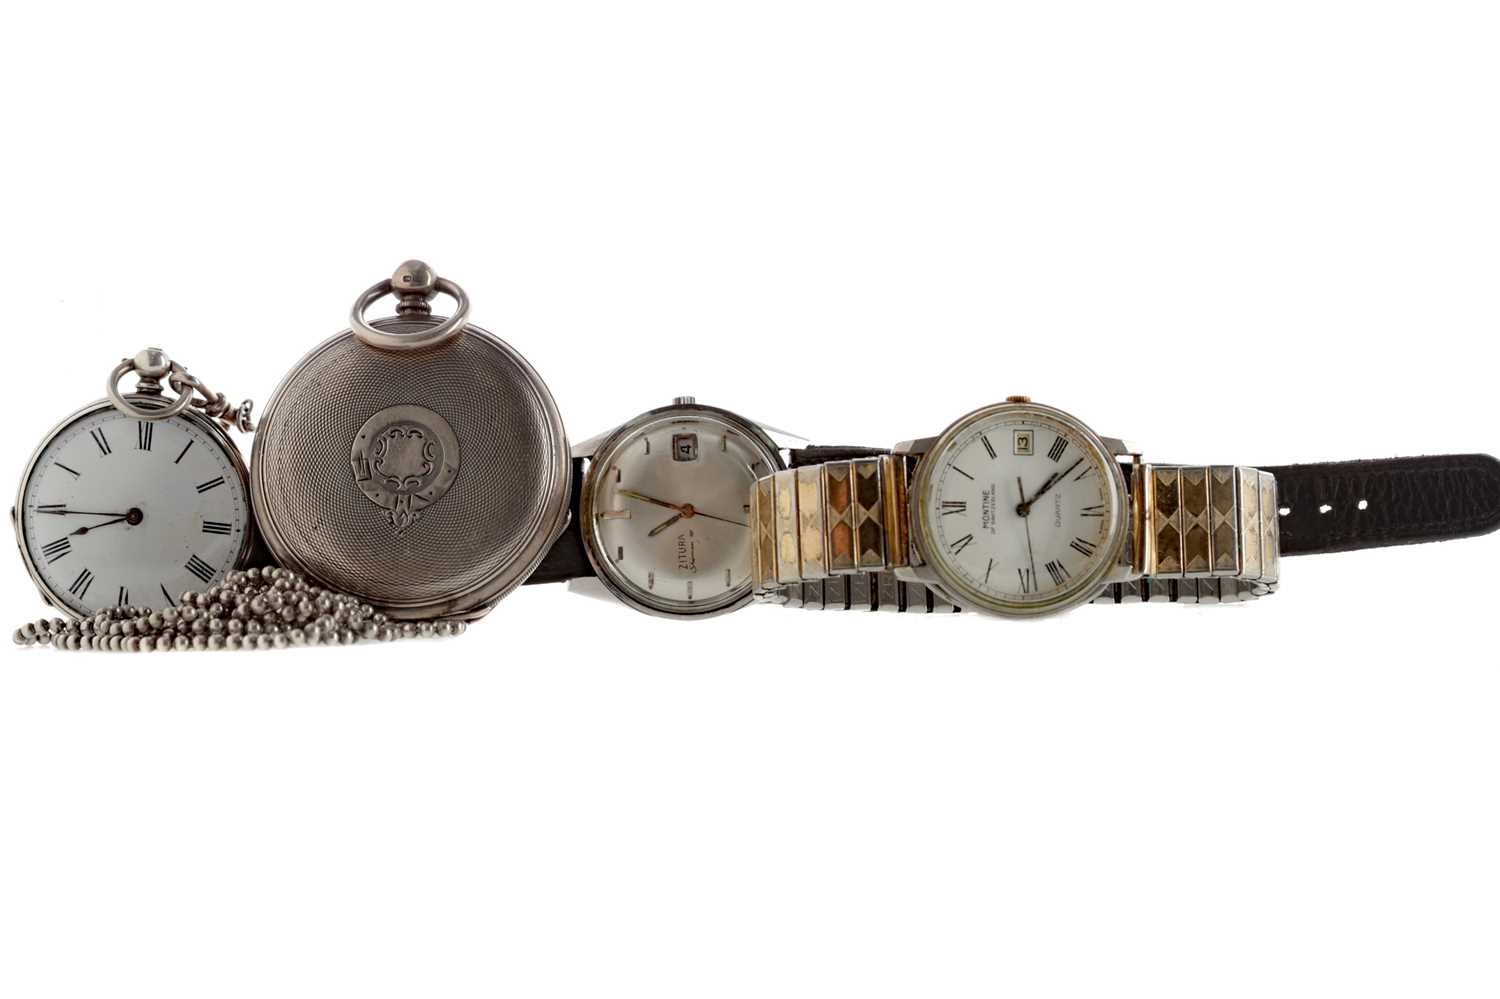 Lot 936 - A SILVER FULL HUNTER KEY WIND POCKET WATCH, A SILVER FOB WATCH AND TWO GENTLEMAN'S WRIST WATCHES